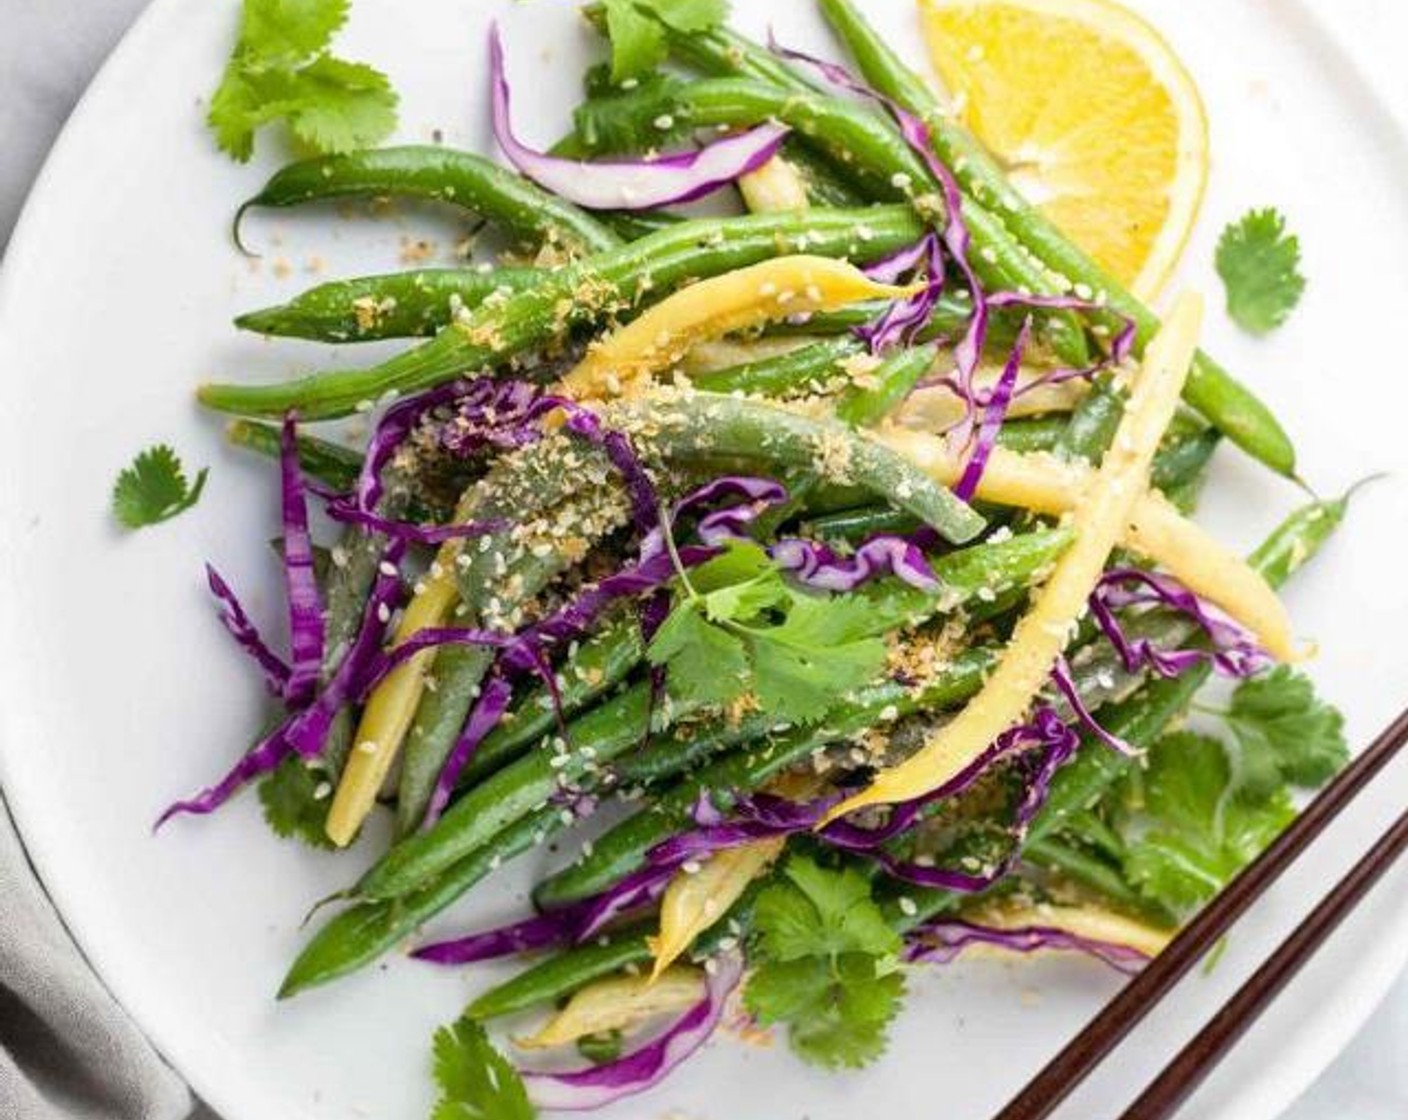 Crunchy Green Beans with Orange Miso Sauce